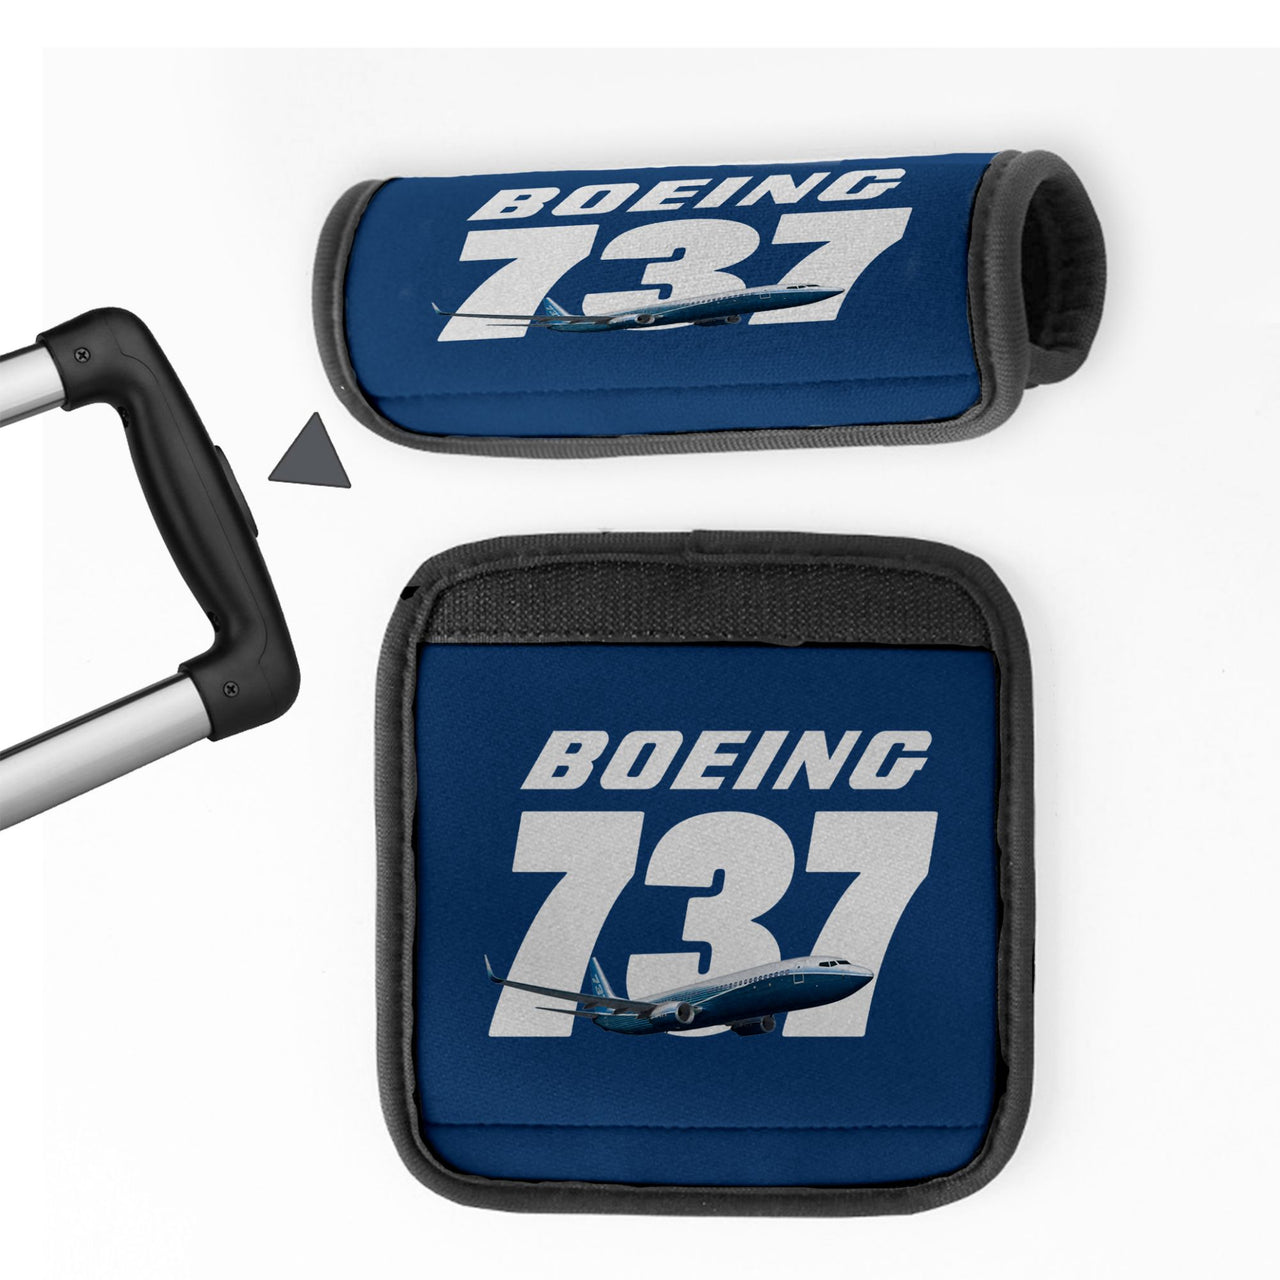 Super Boeing 737+Text Designed Neoprene Luggage Handle Covers